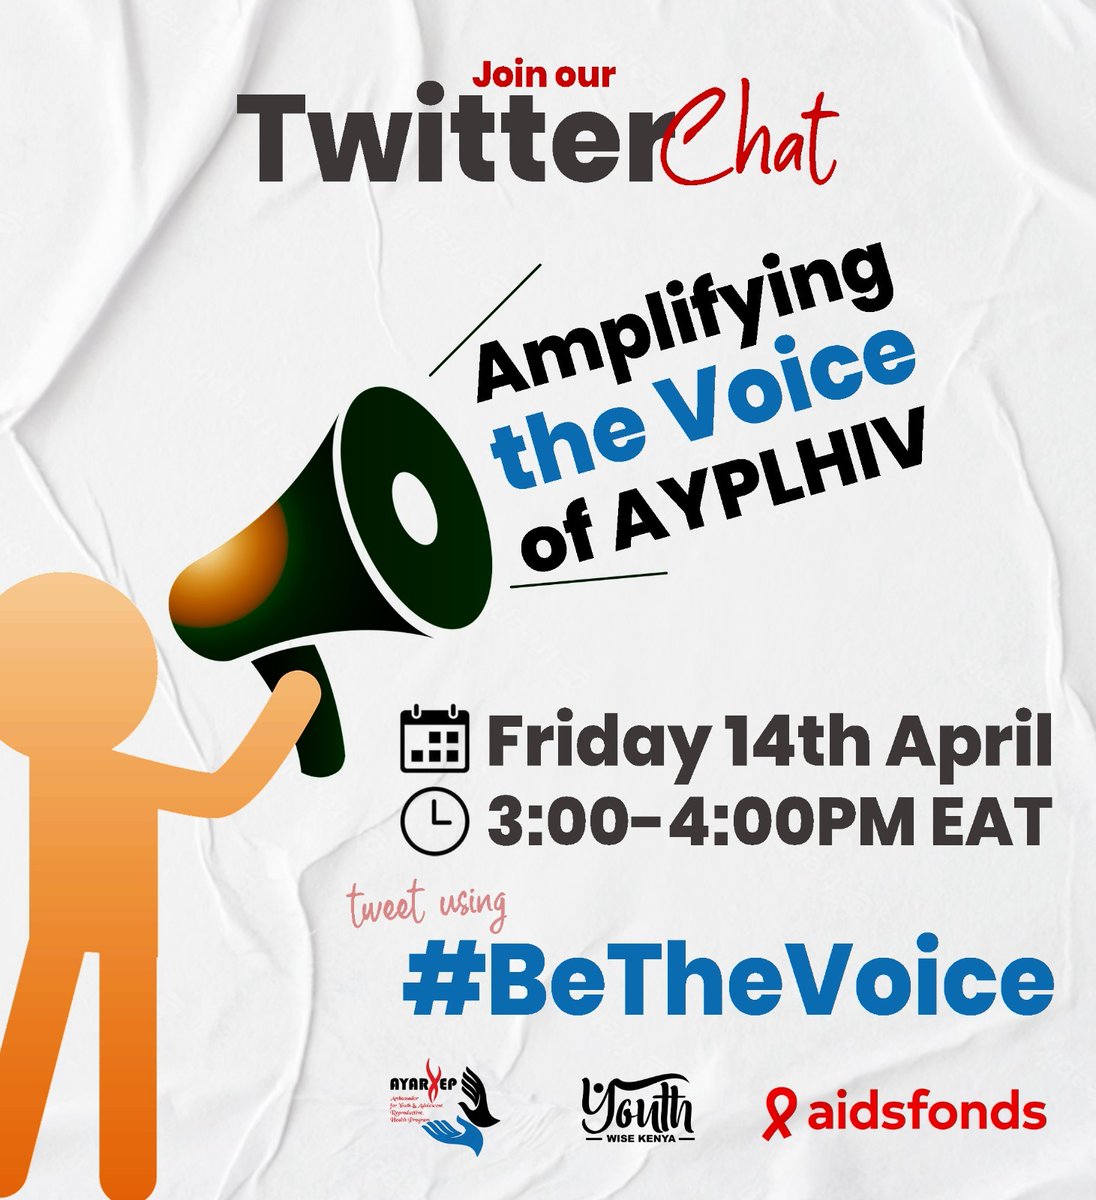 Hey, peeps!  Join us today at 3-4 pm and let's rock this revolution together! We've got the power to amplify their voices and create change. Don't miss out on being part of something epic! #BeTheVoice